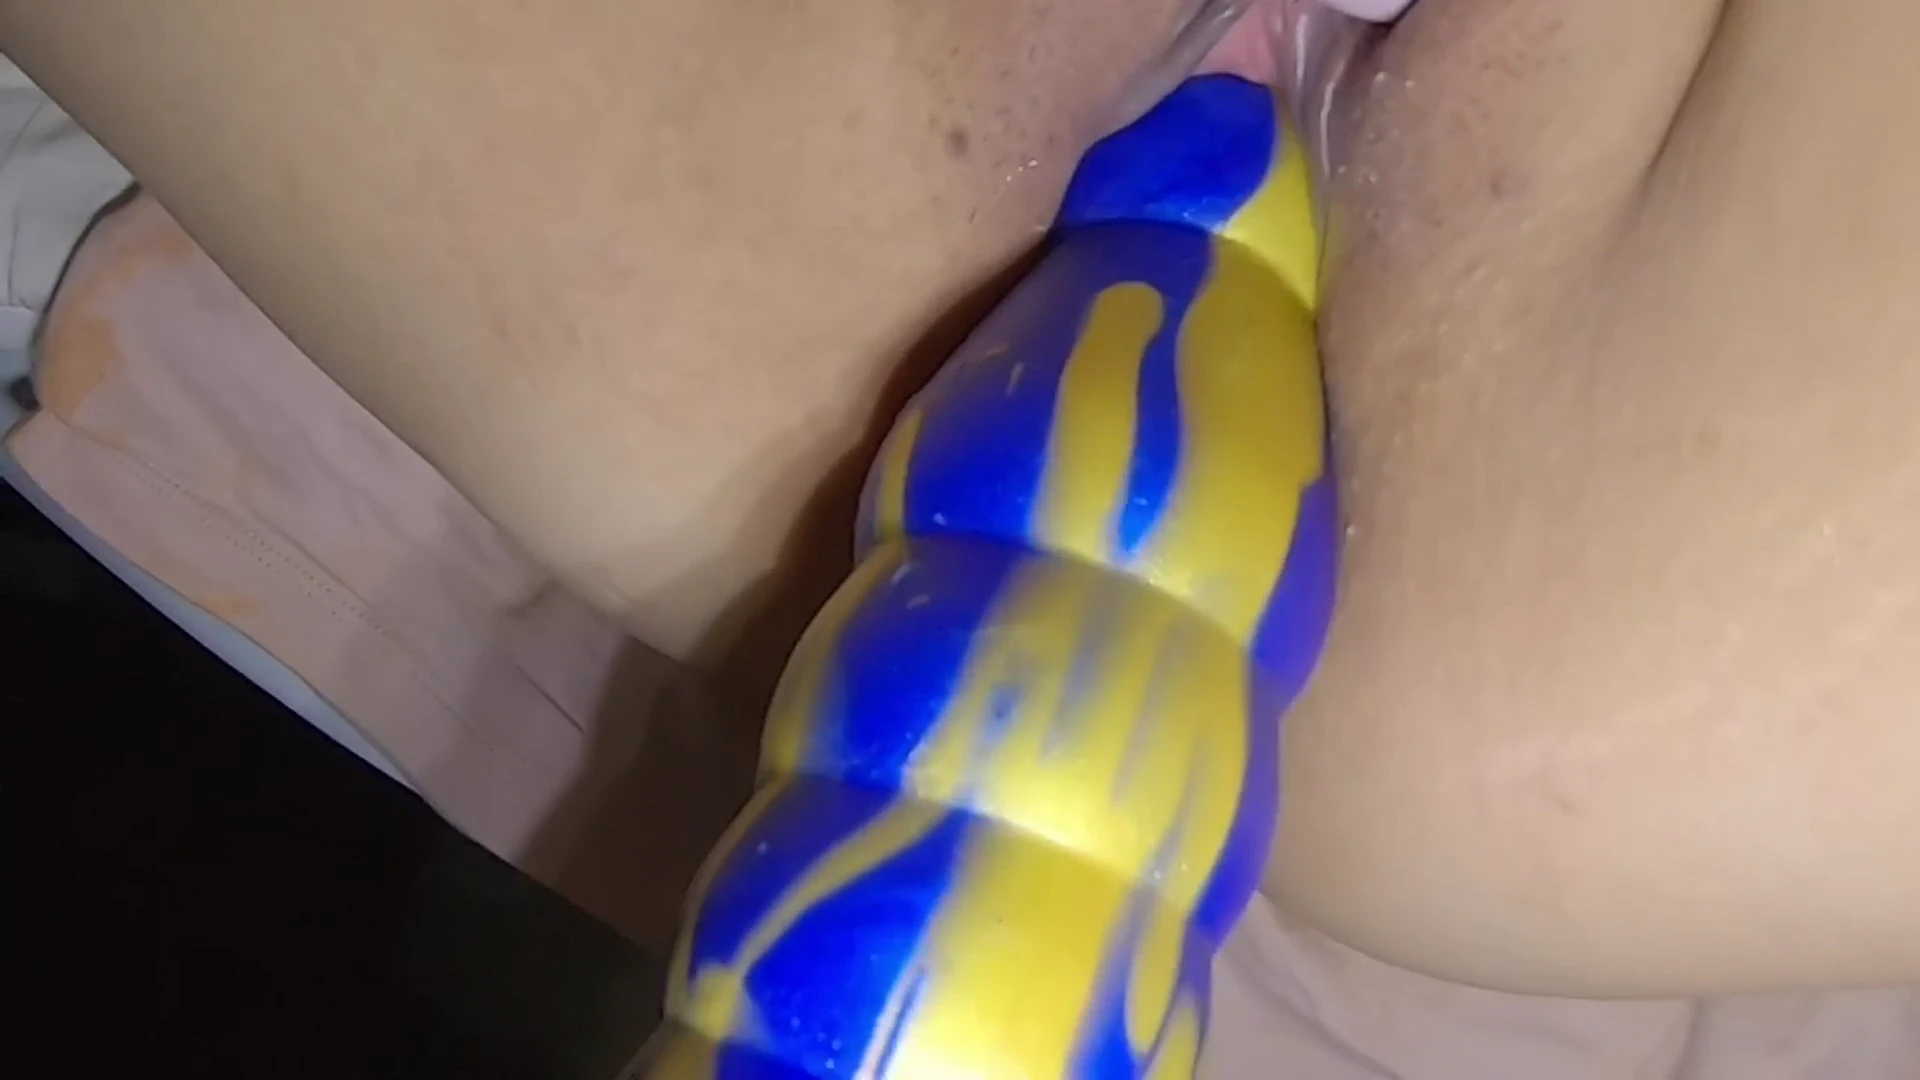 I used this dildo called The Rain Maker. My pussy was so wet and creamy at the end.